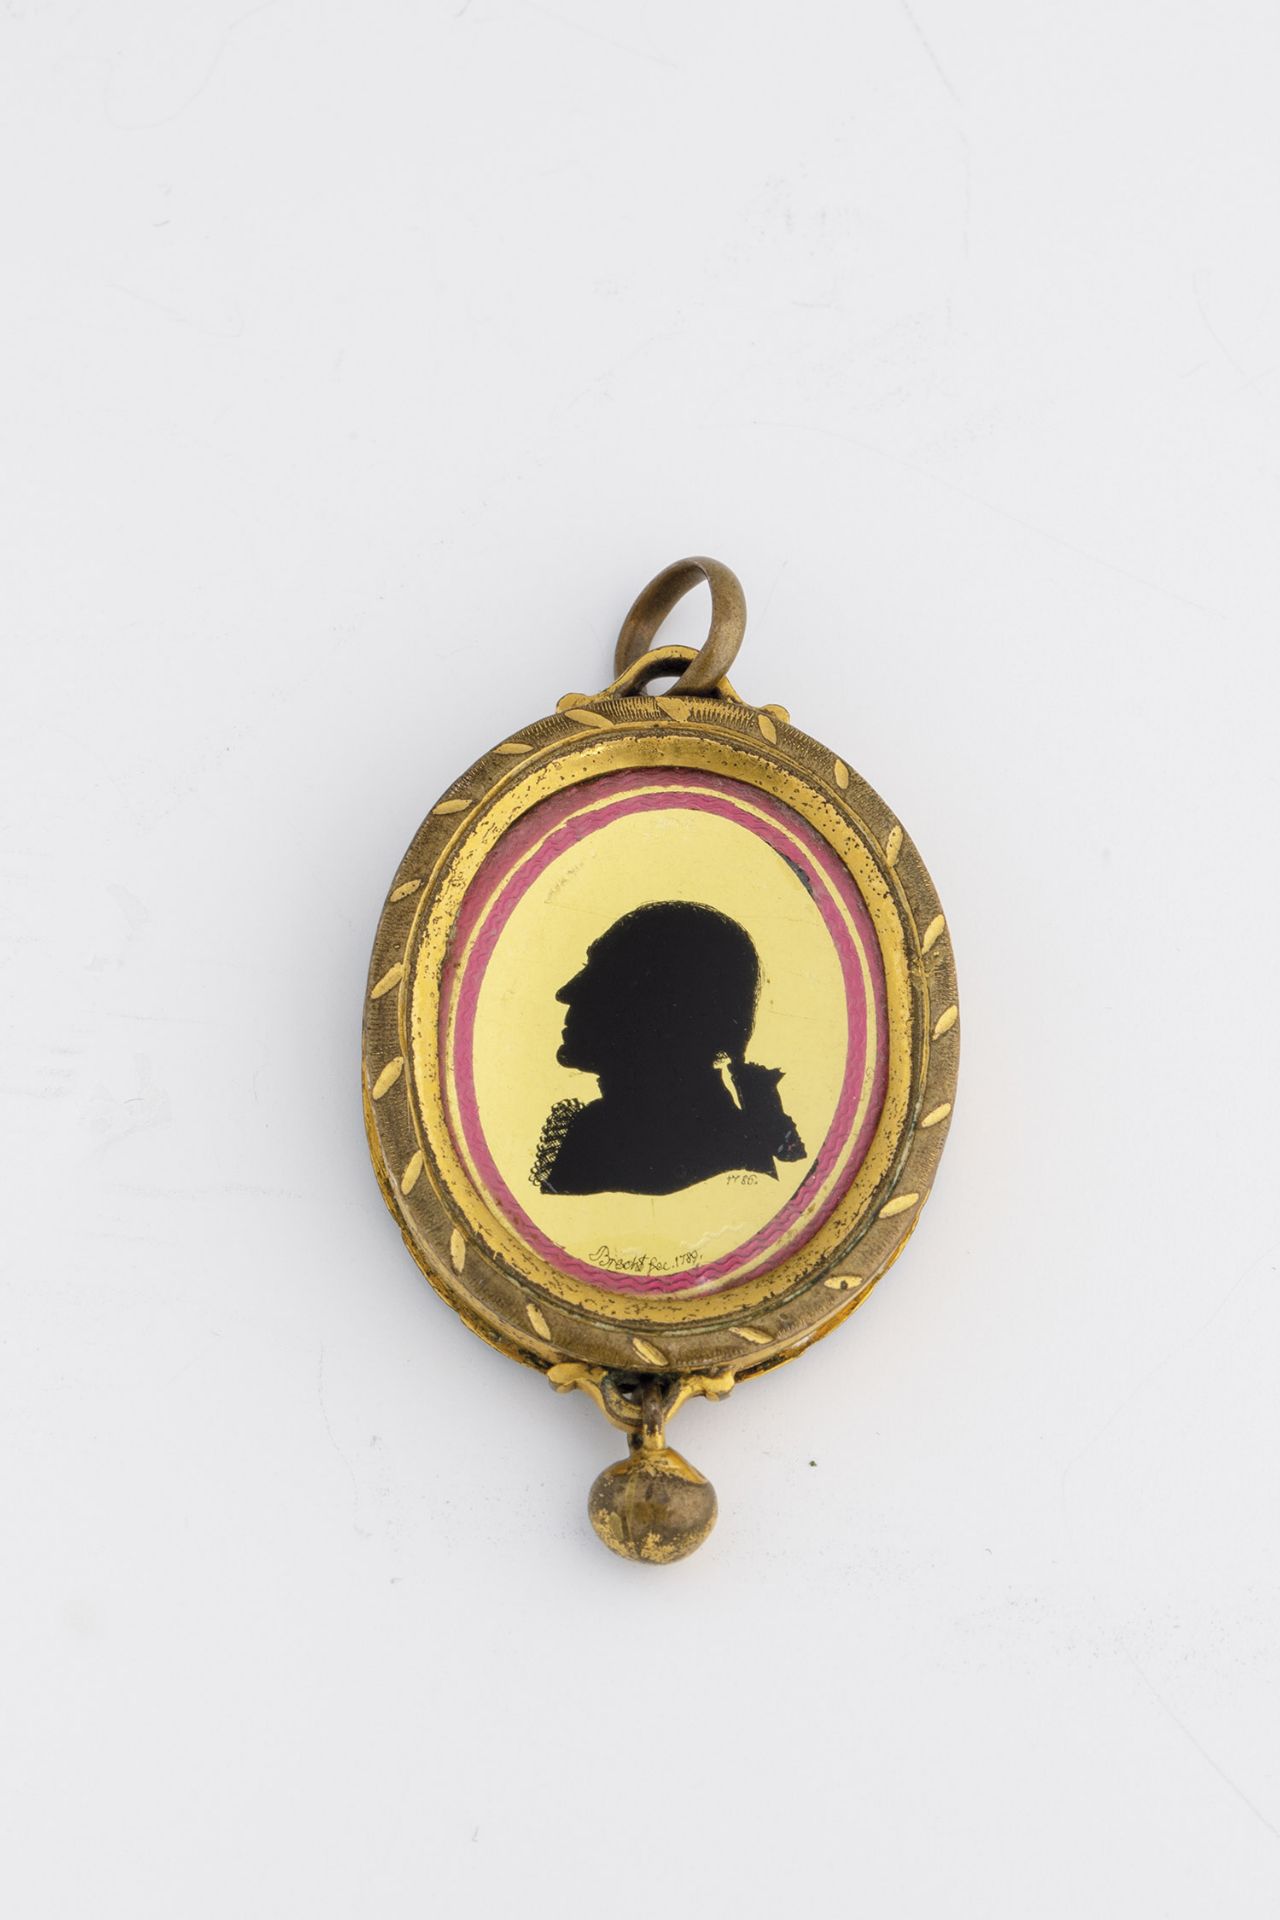 Eglomise pendant with silhouette portraits Signed and dated ''Brecht fec. 1789'' Profile